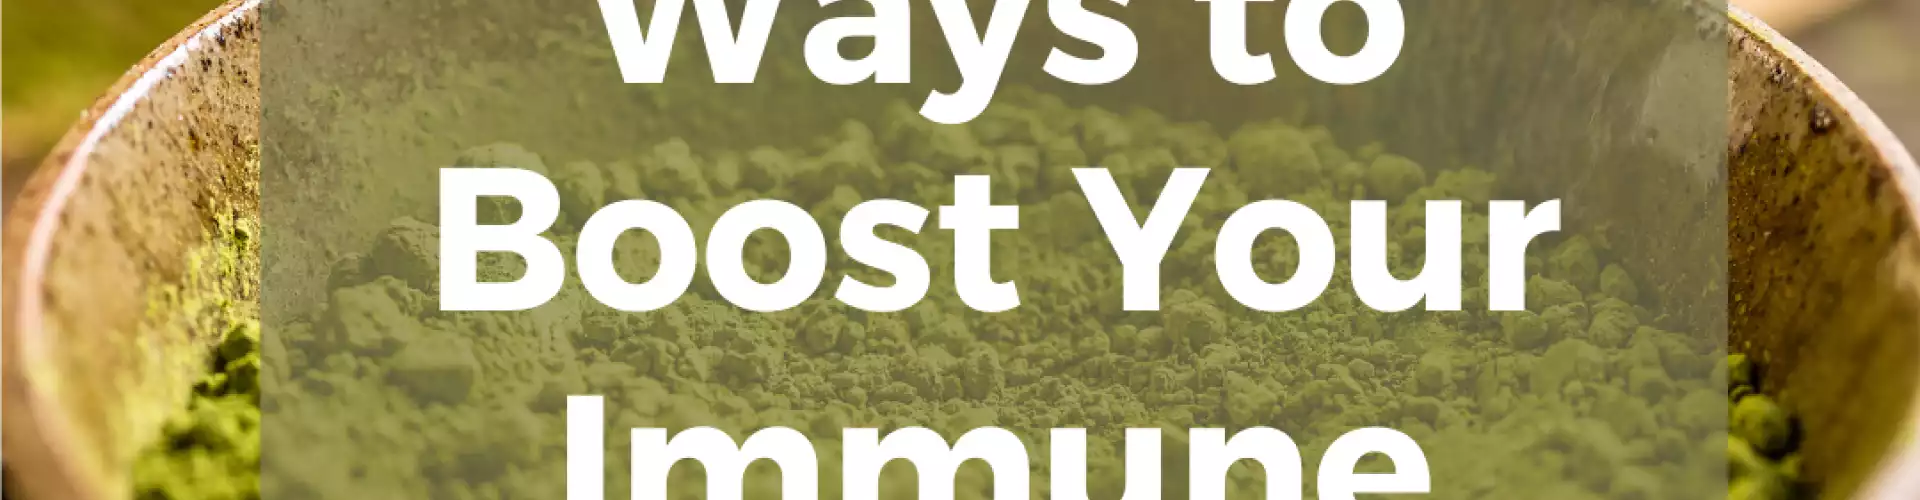 10 Natural Ways to Boost Your Immune System